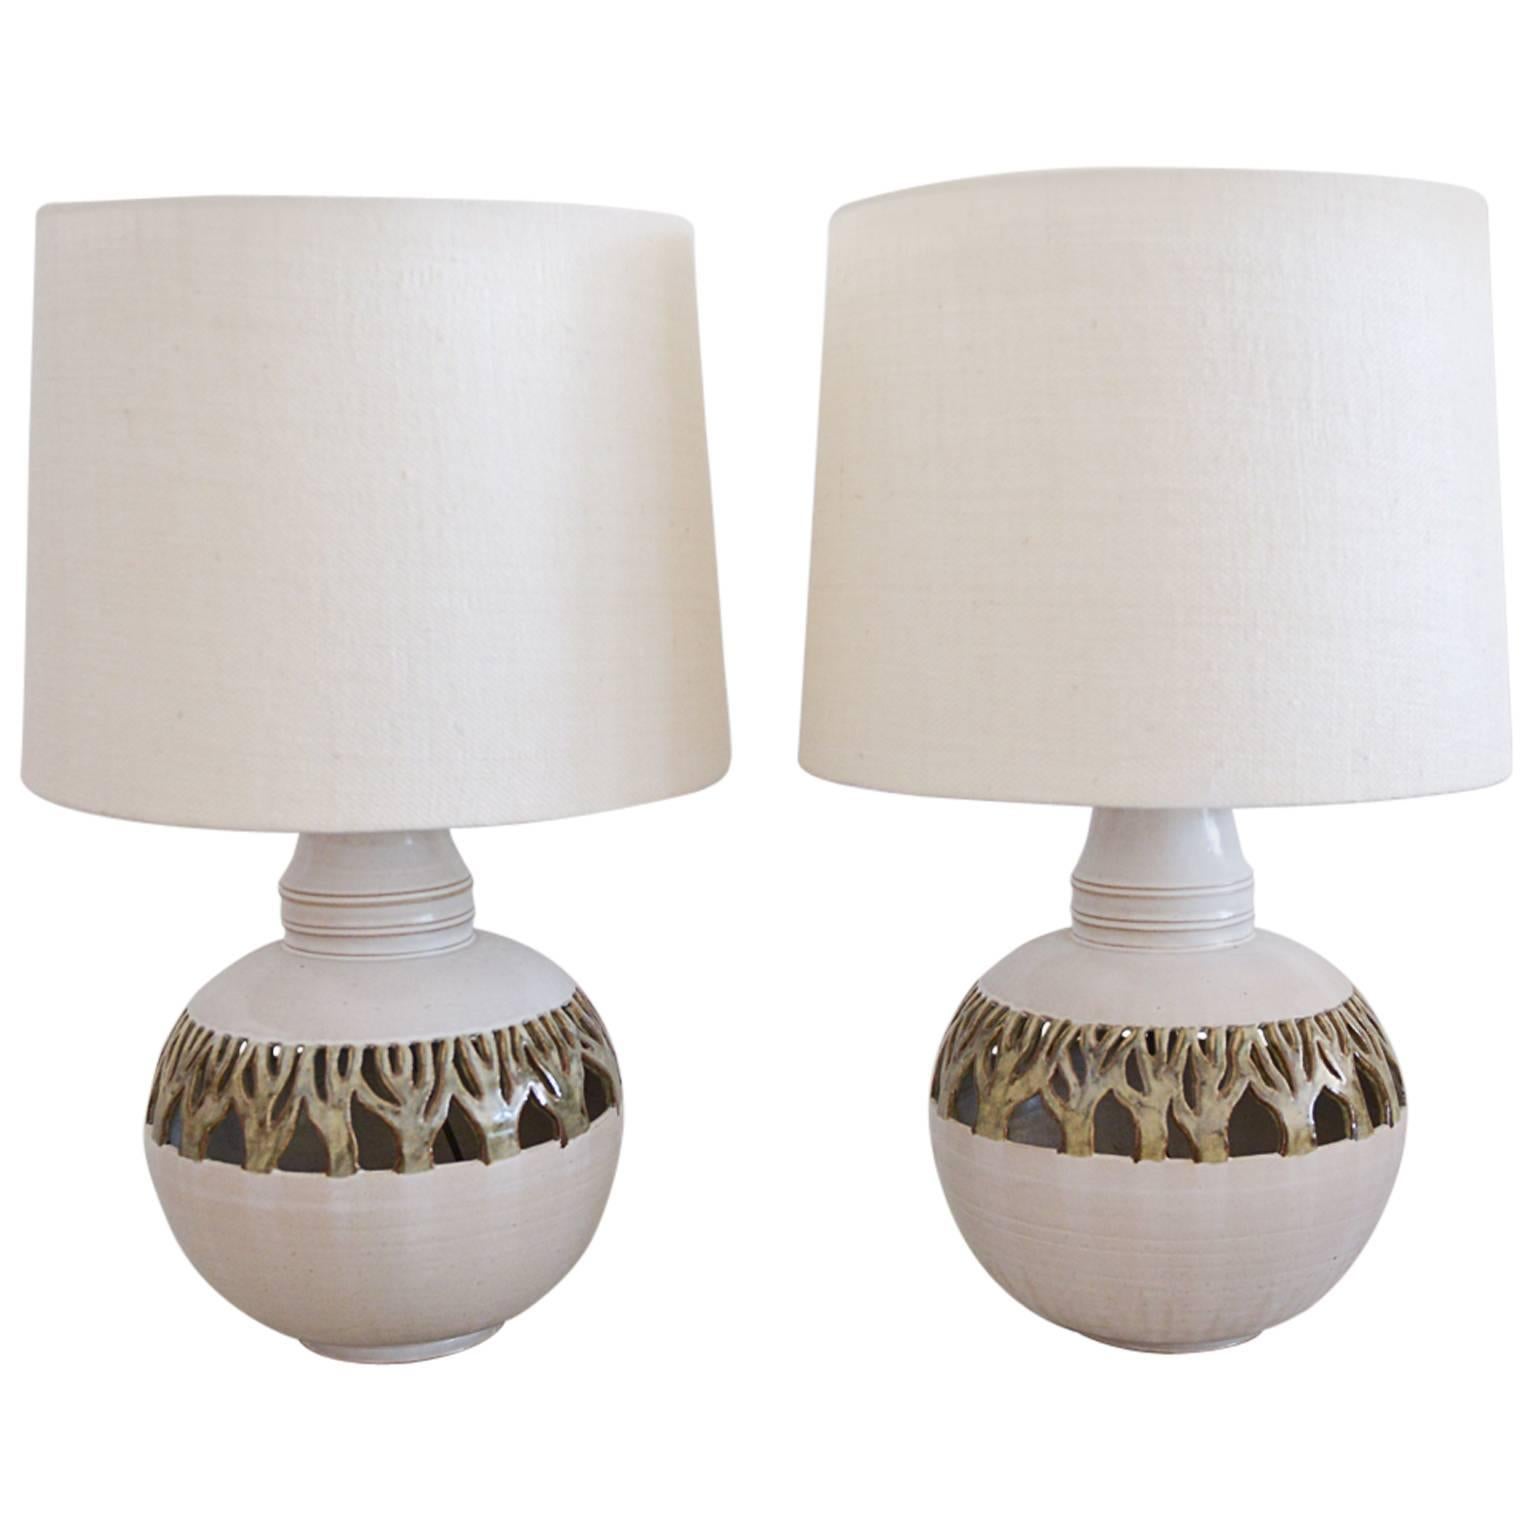 Pair of Ceramic Cut-Out Lamps with Custom Shades